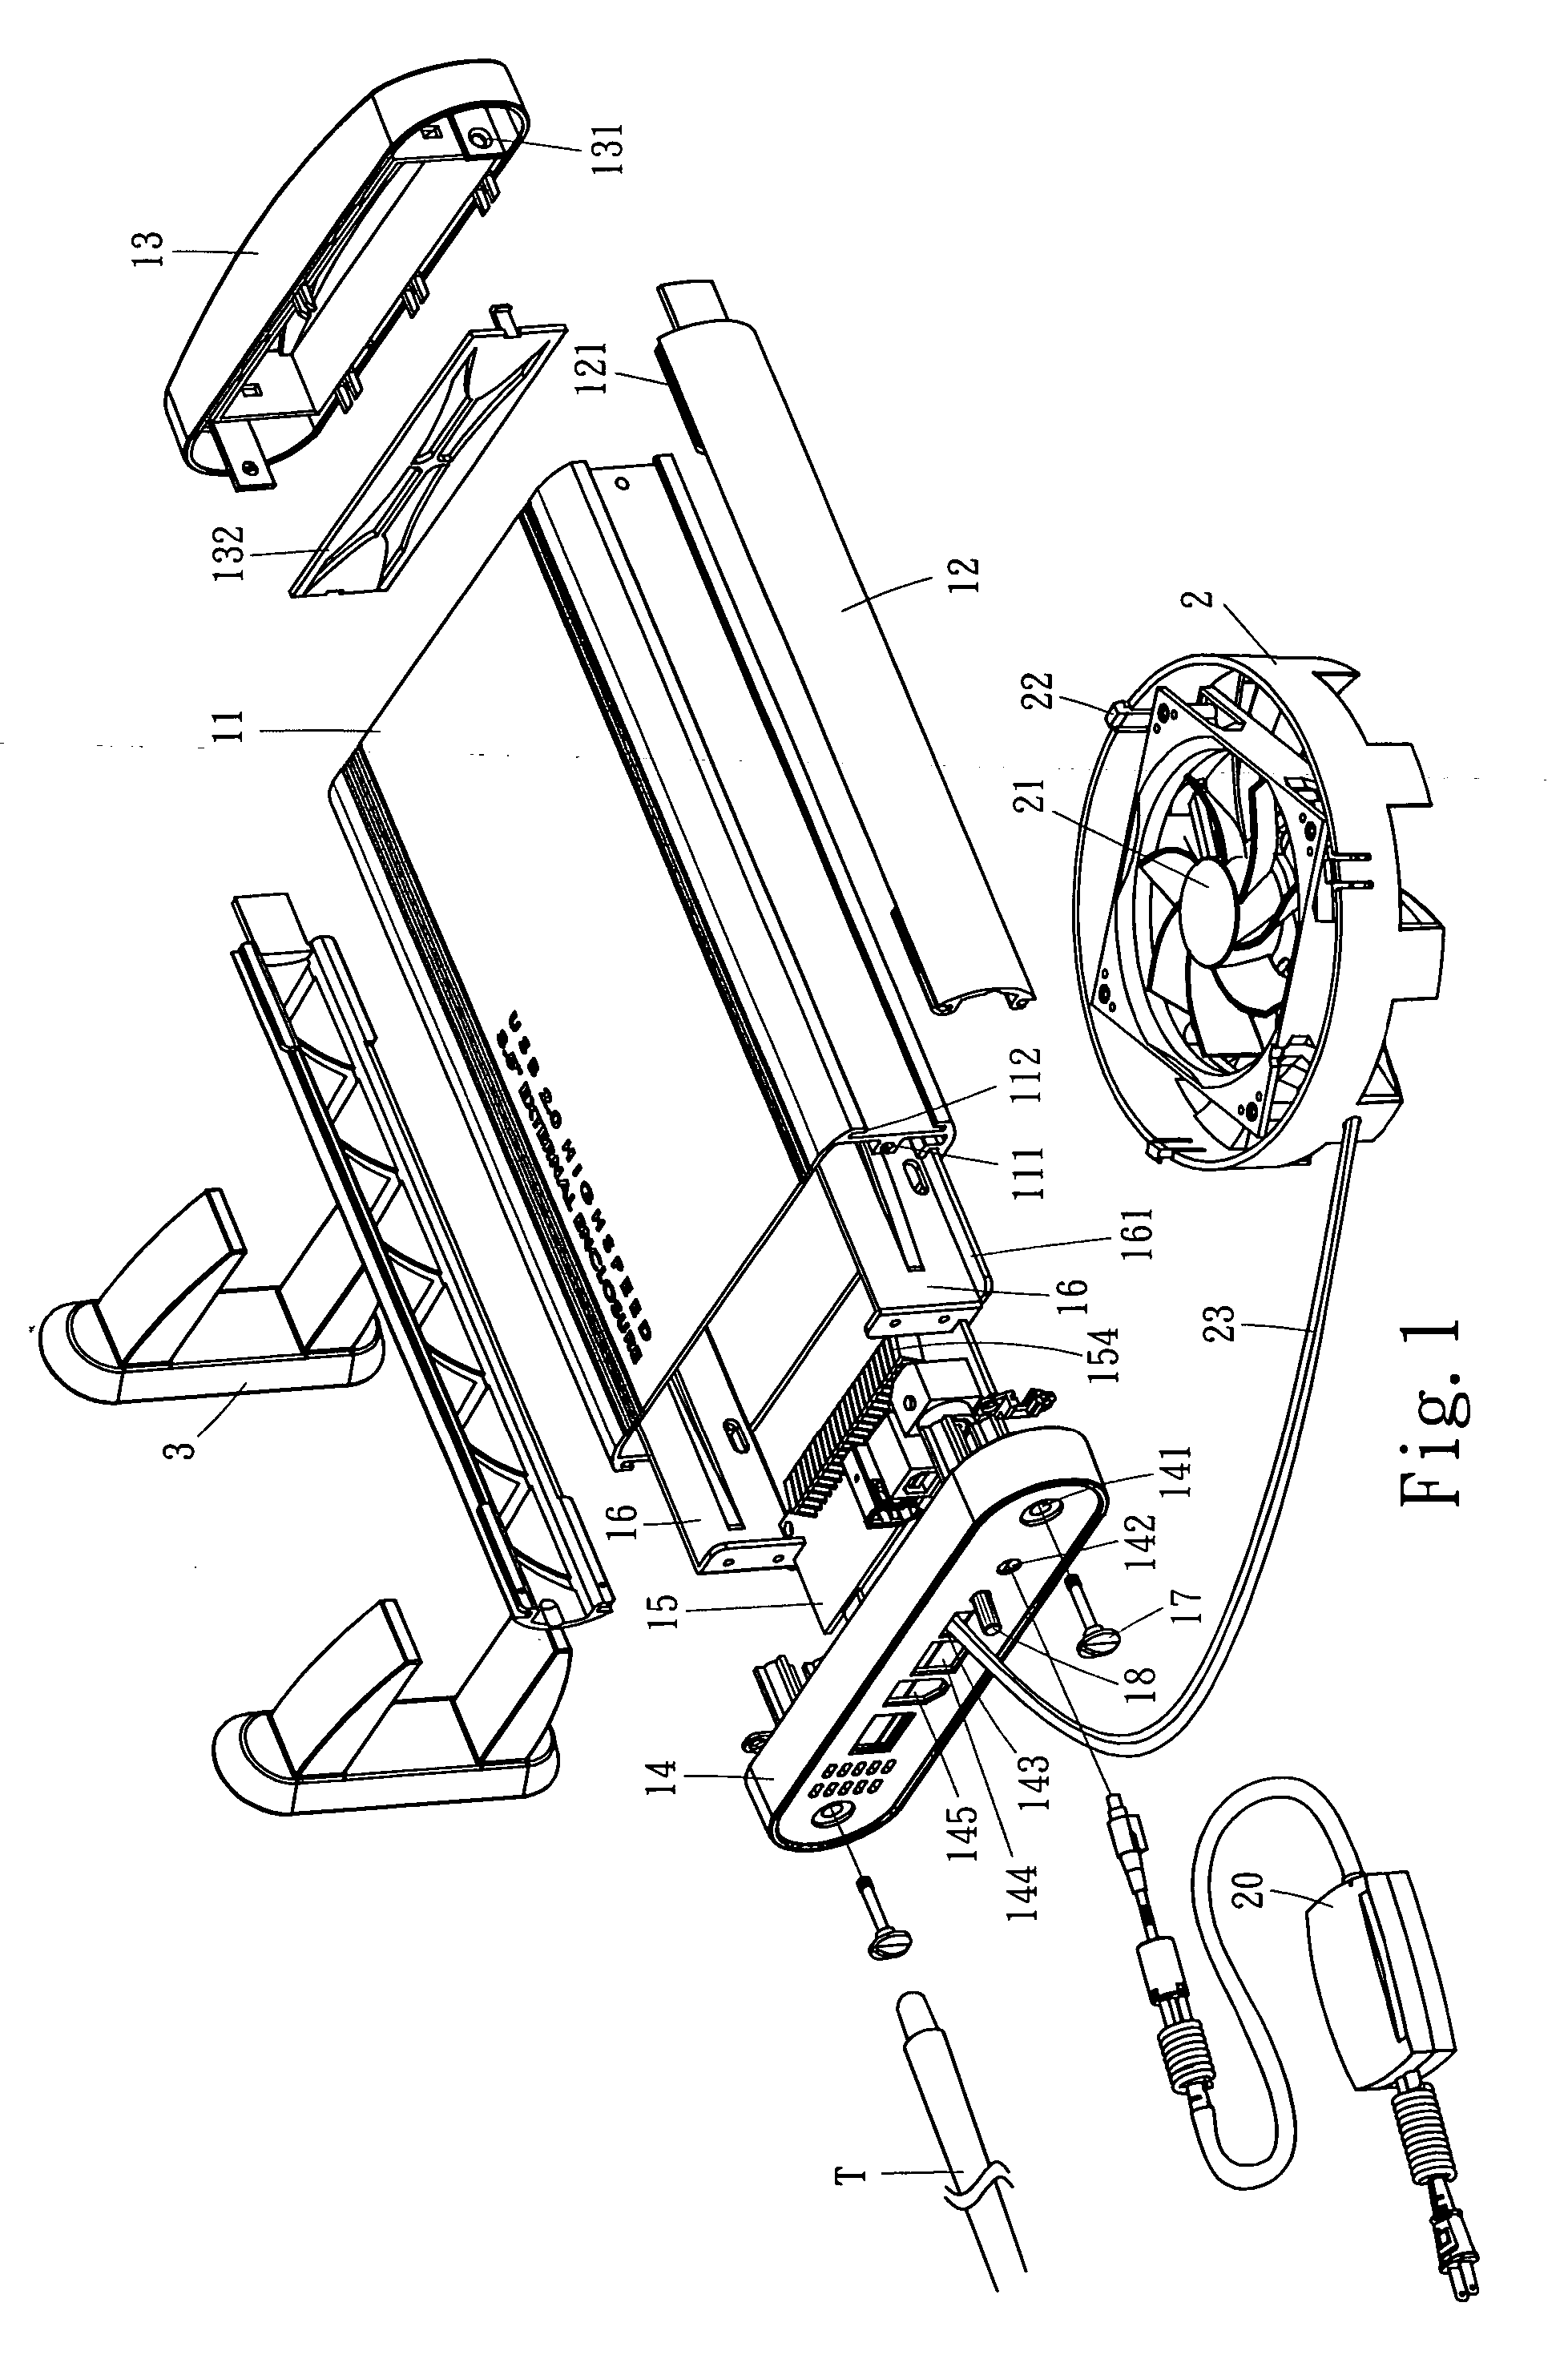 External computer hard drive and heat-dissipating base thereof